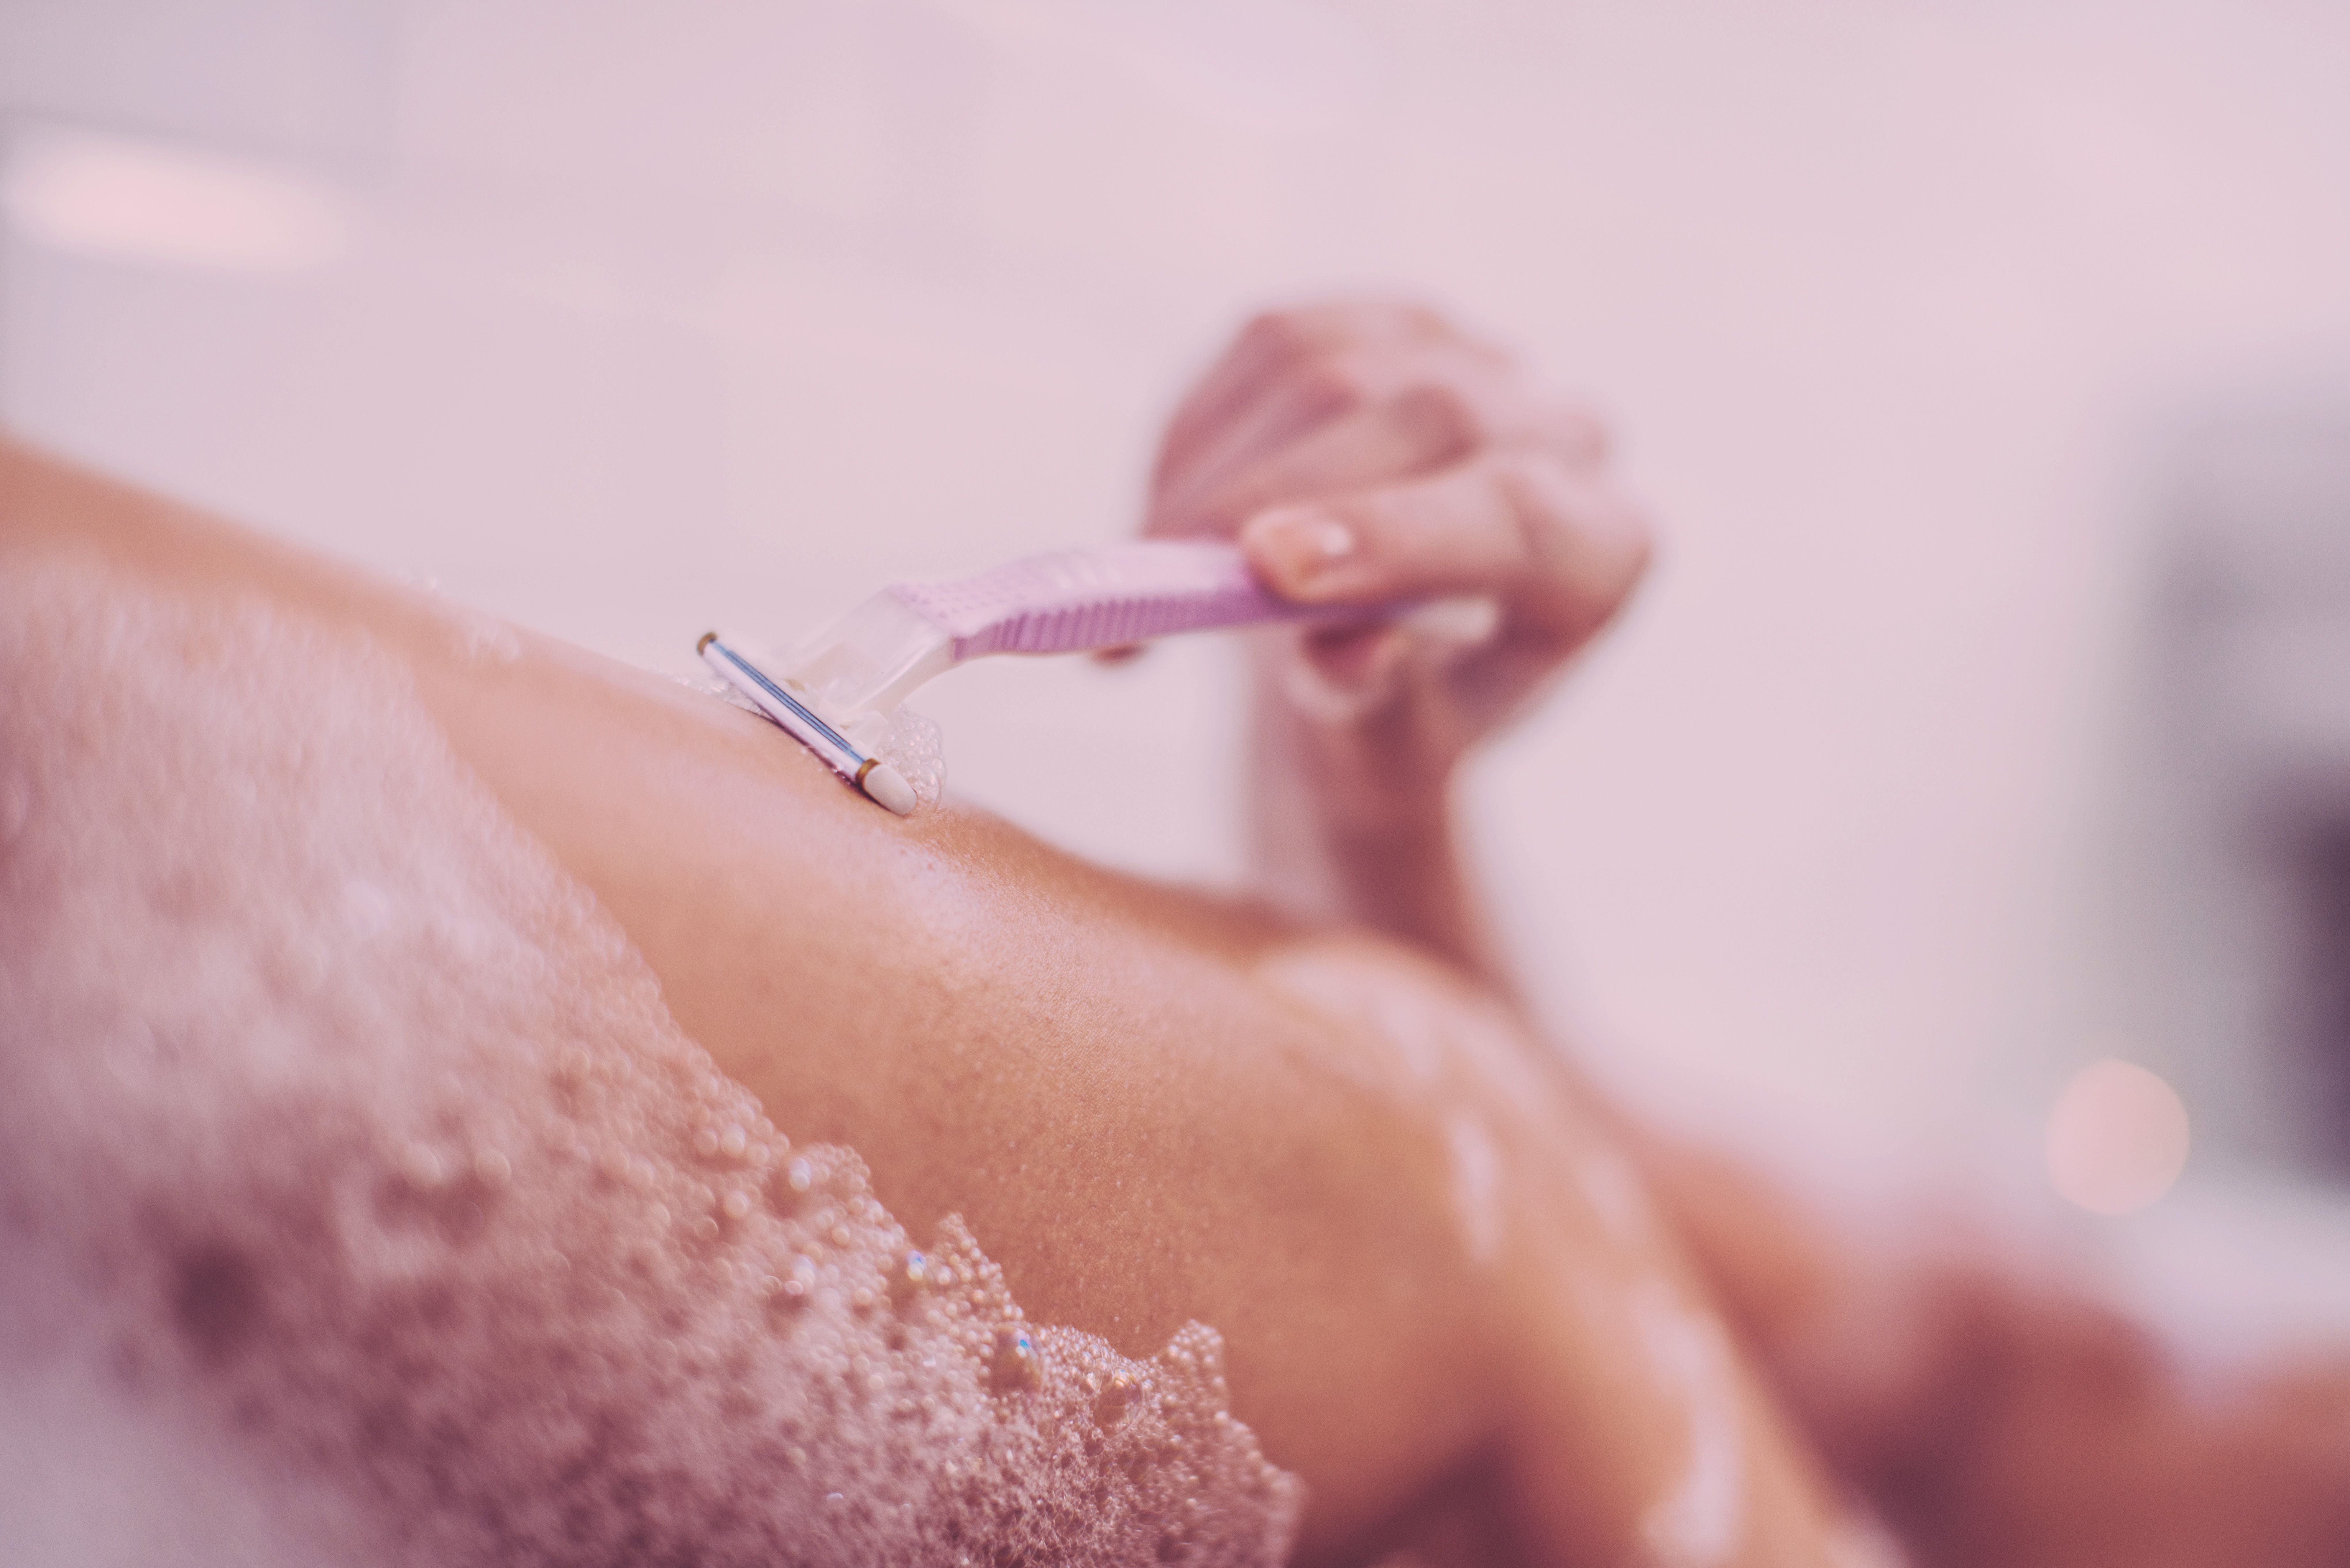 A dermatologists tips for ingrown hairs skin care and shaving